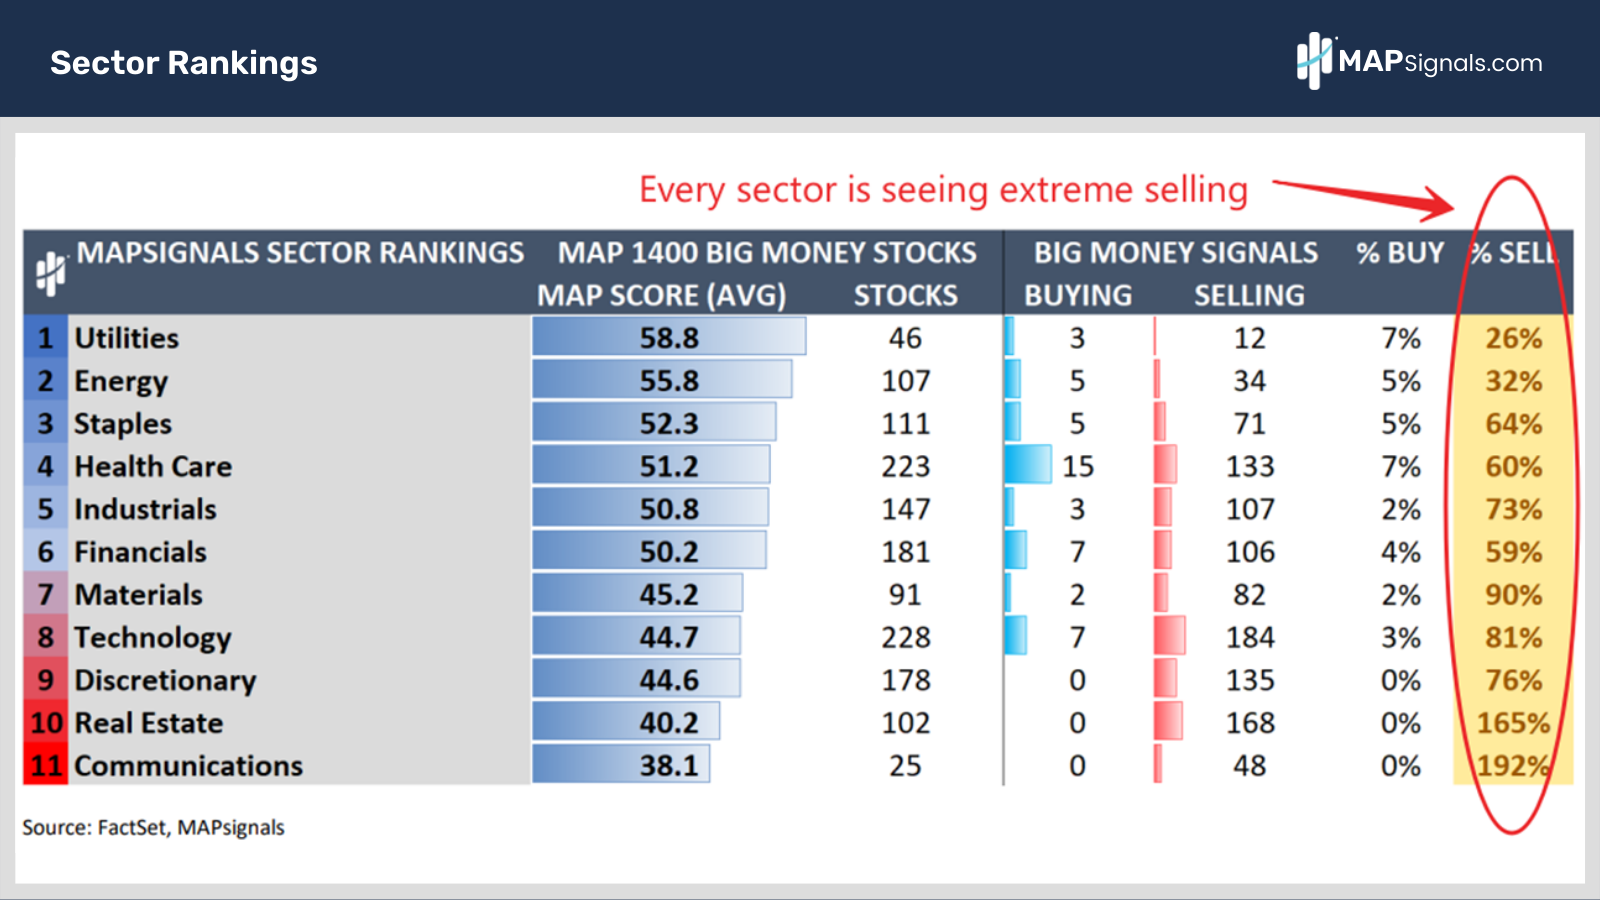 Every sector is seeing extreme selling | MAPsignals Sector Rankings